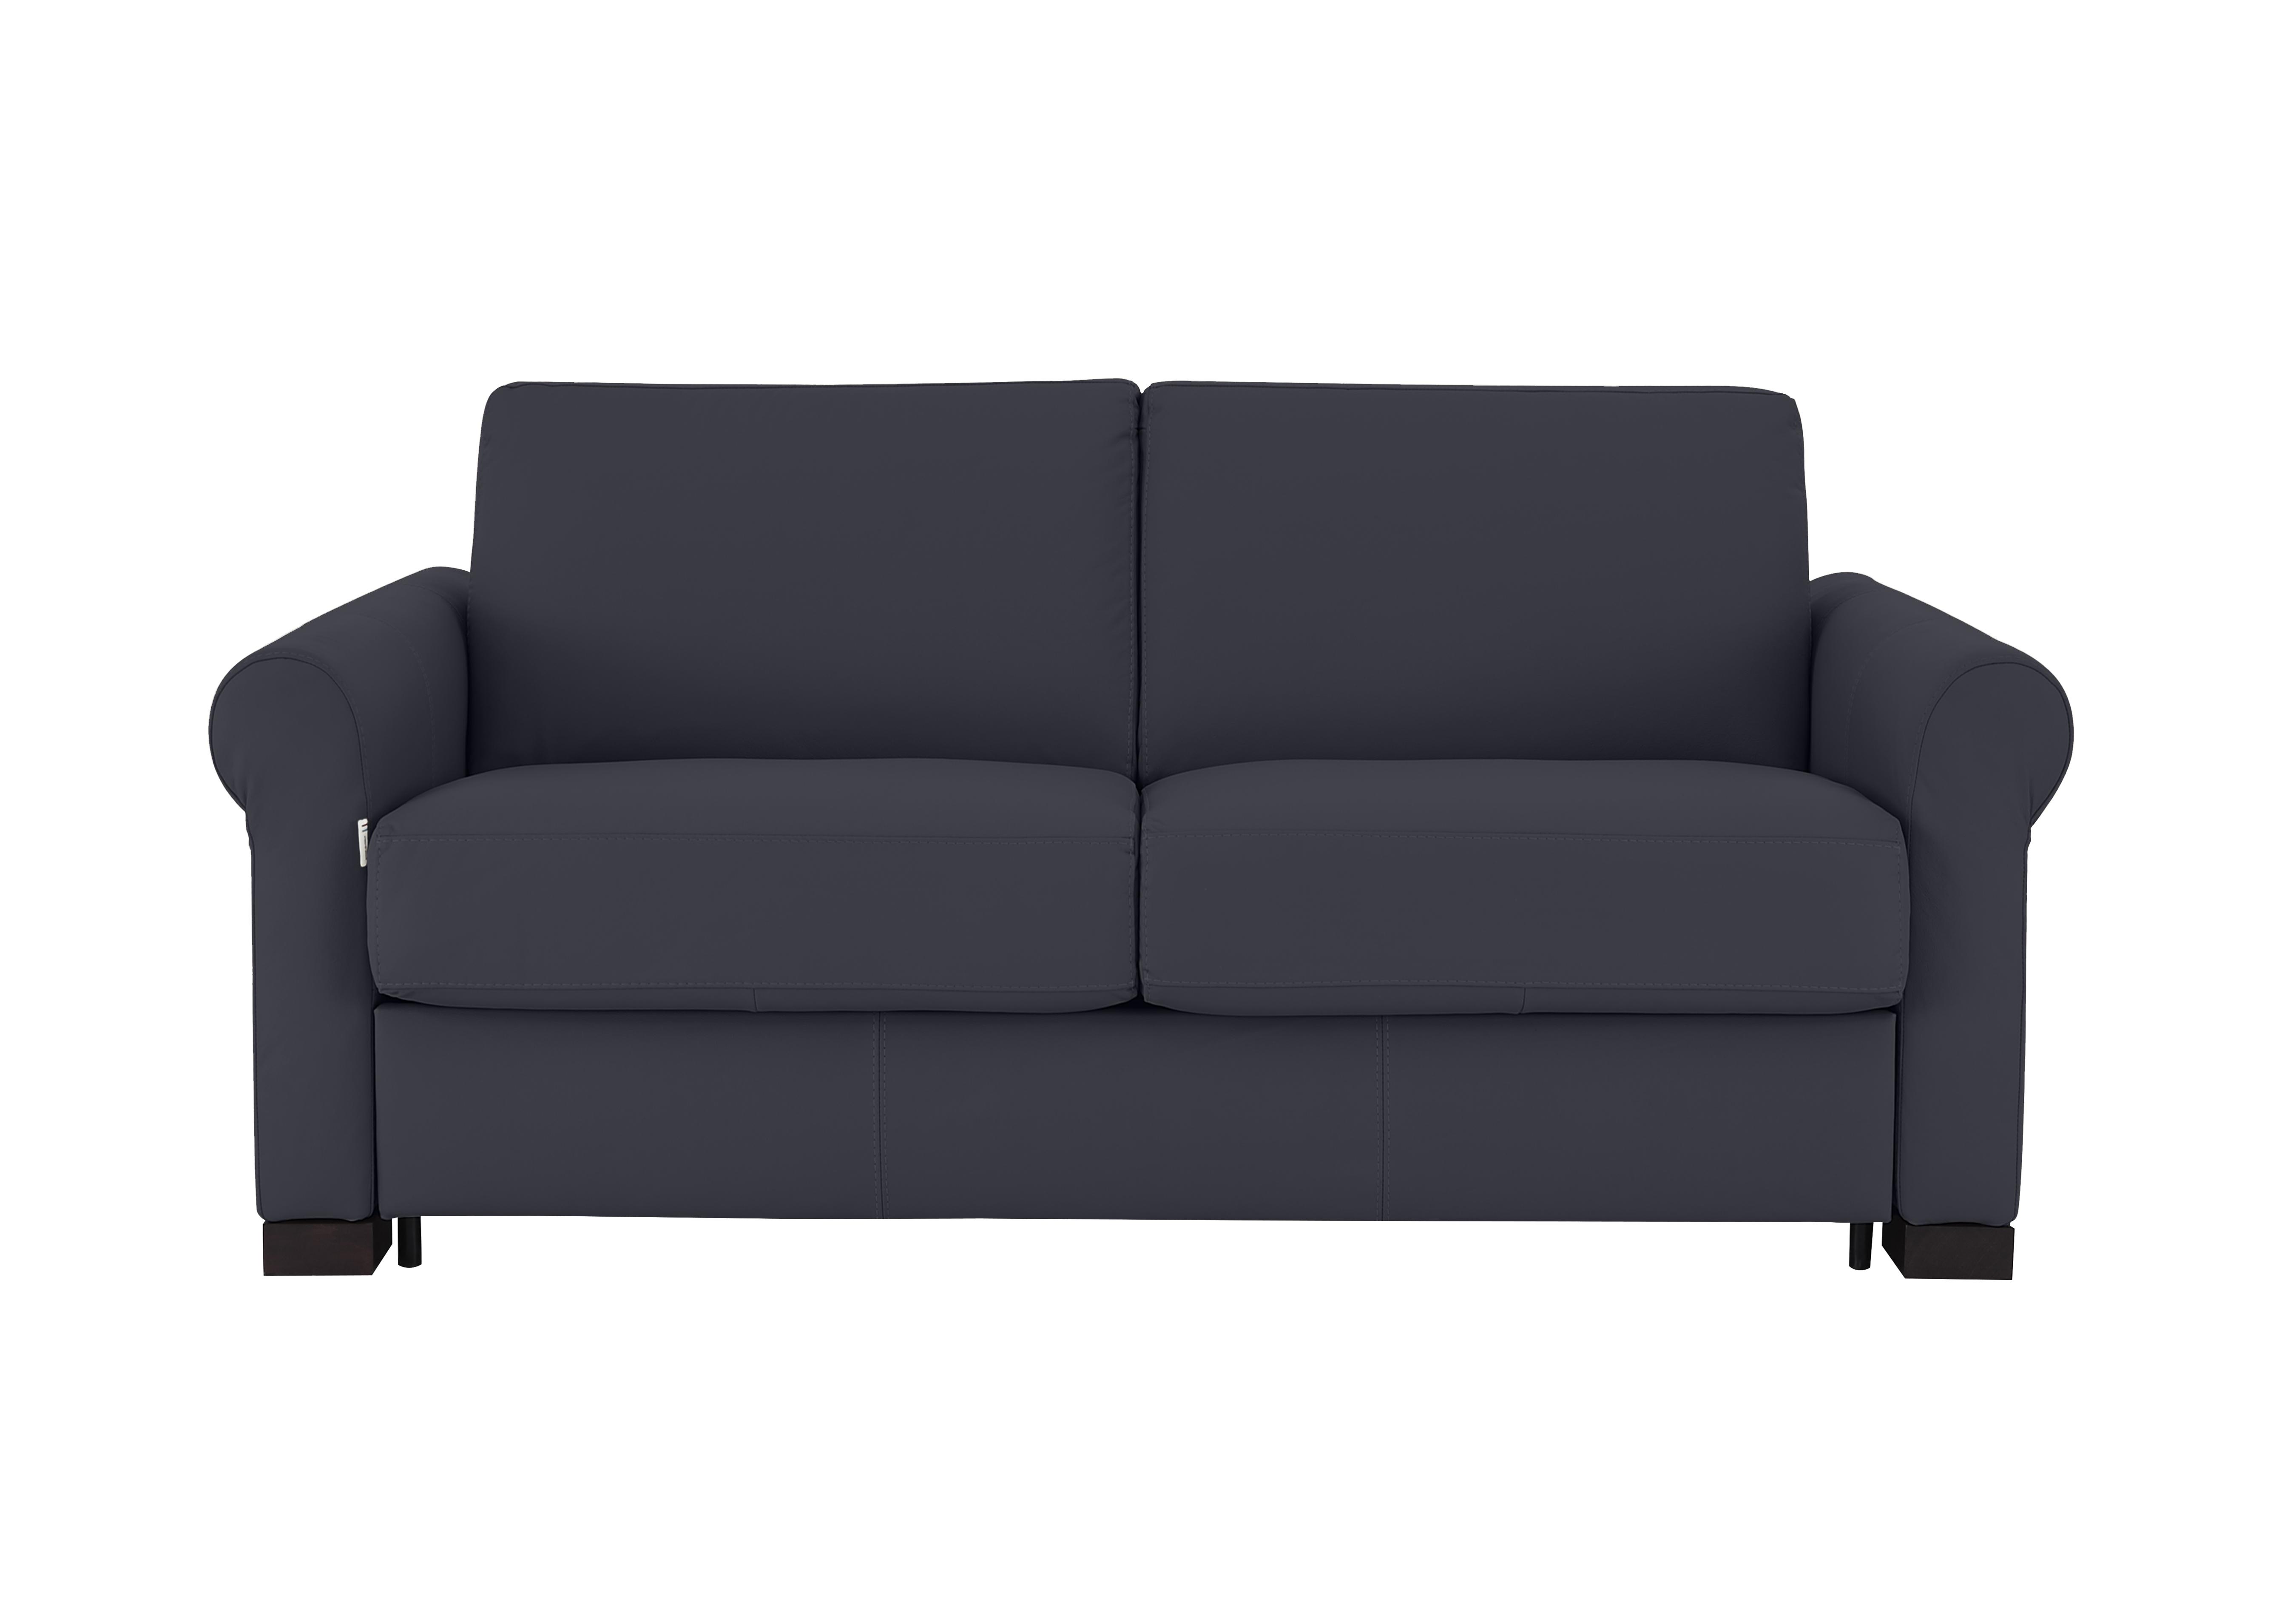 Alcova 2 Seater Leather Sofa Bed with Scroll Arms in Torello Blu 81 on Furniture Village